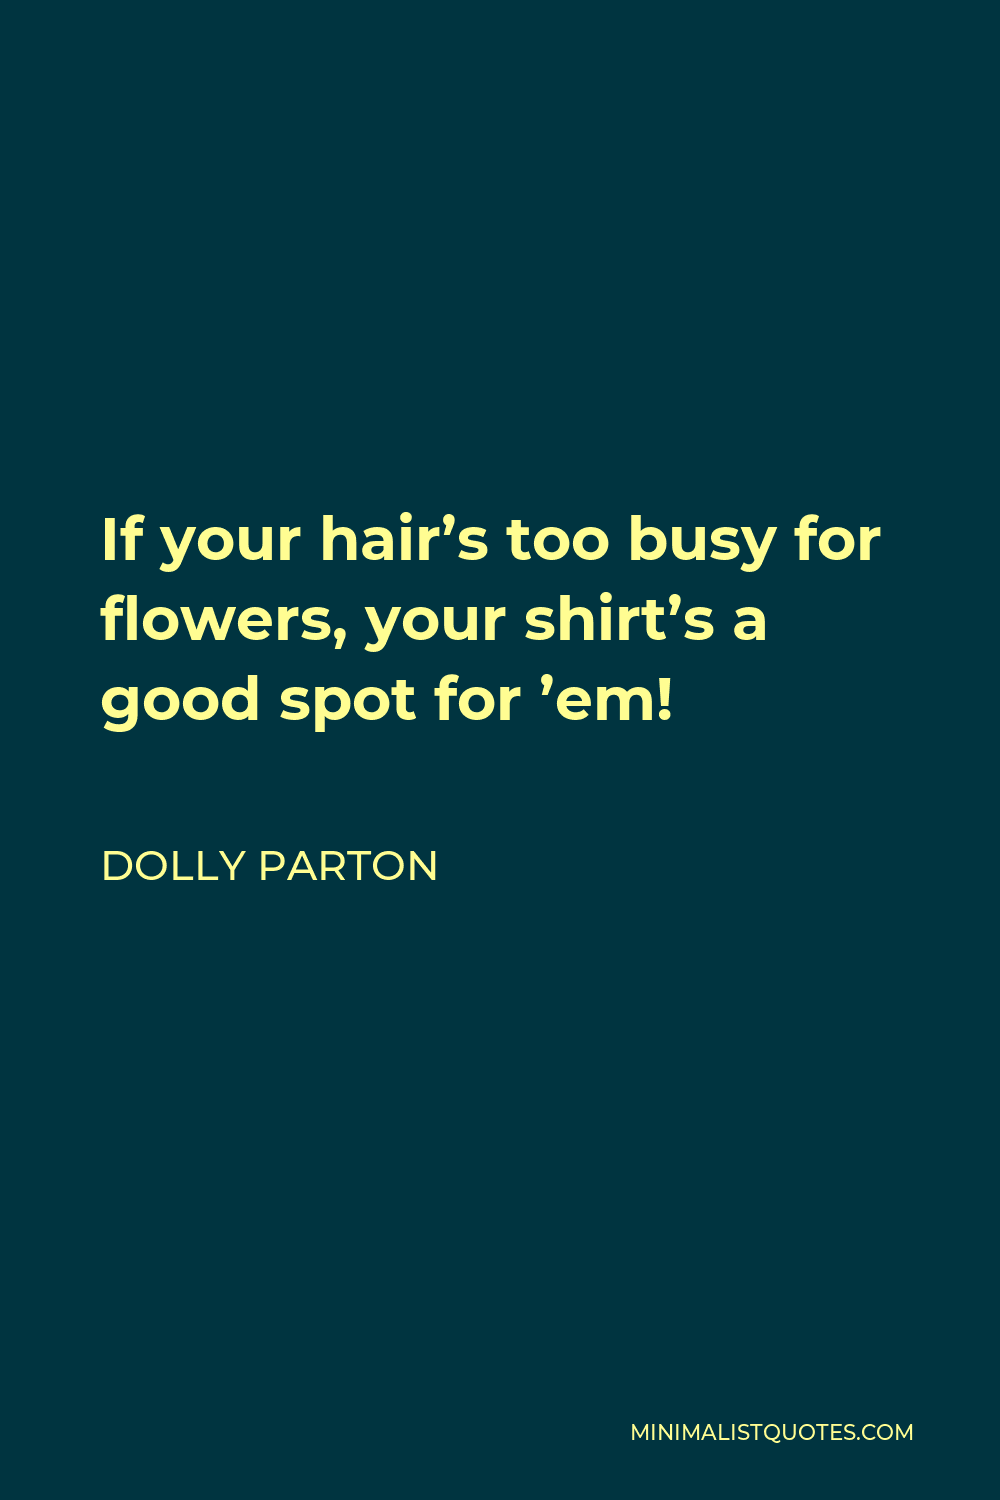 Dolly Parton Quote - If your hair’s too busy for flowers, your shirt’s a good spot for ’em!